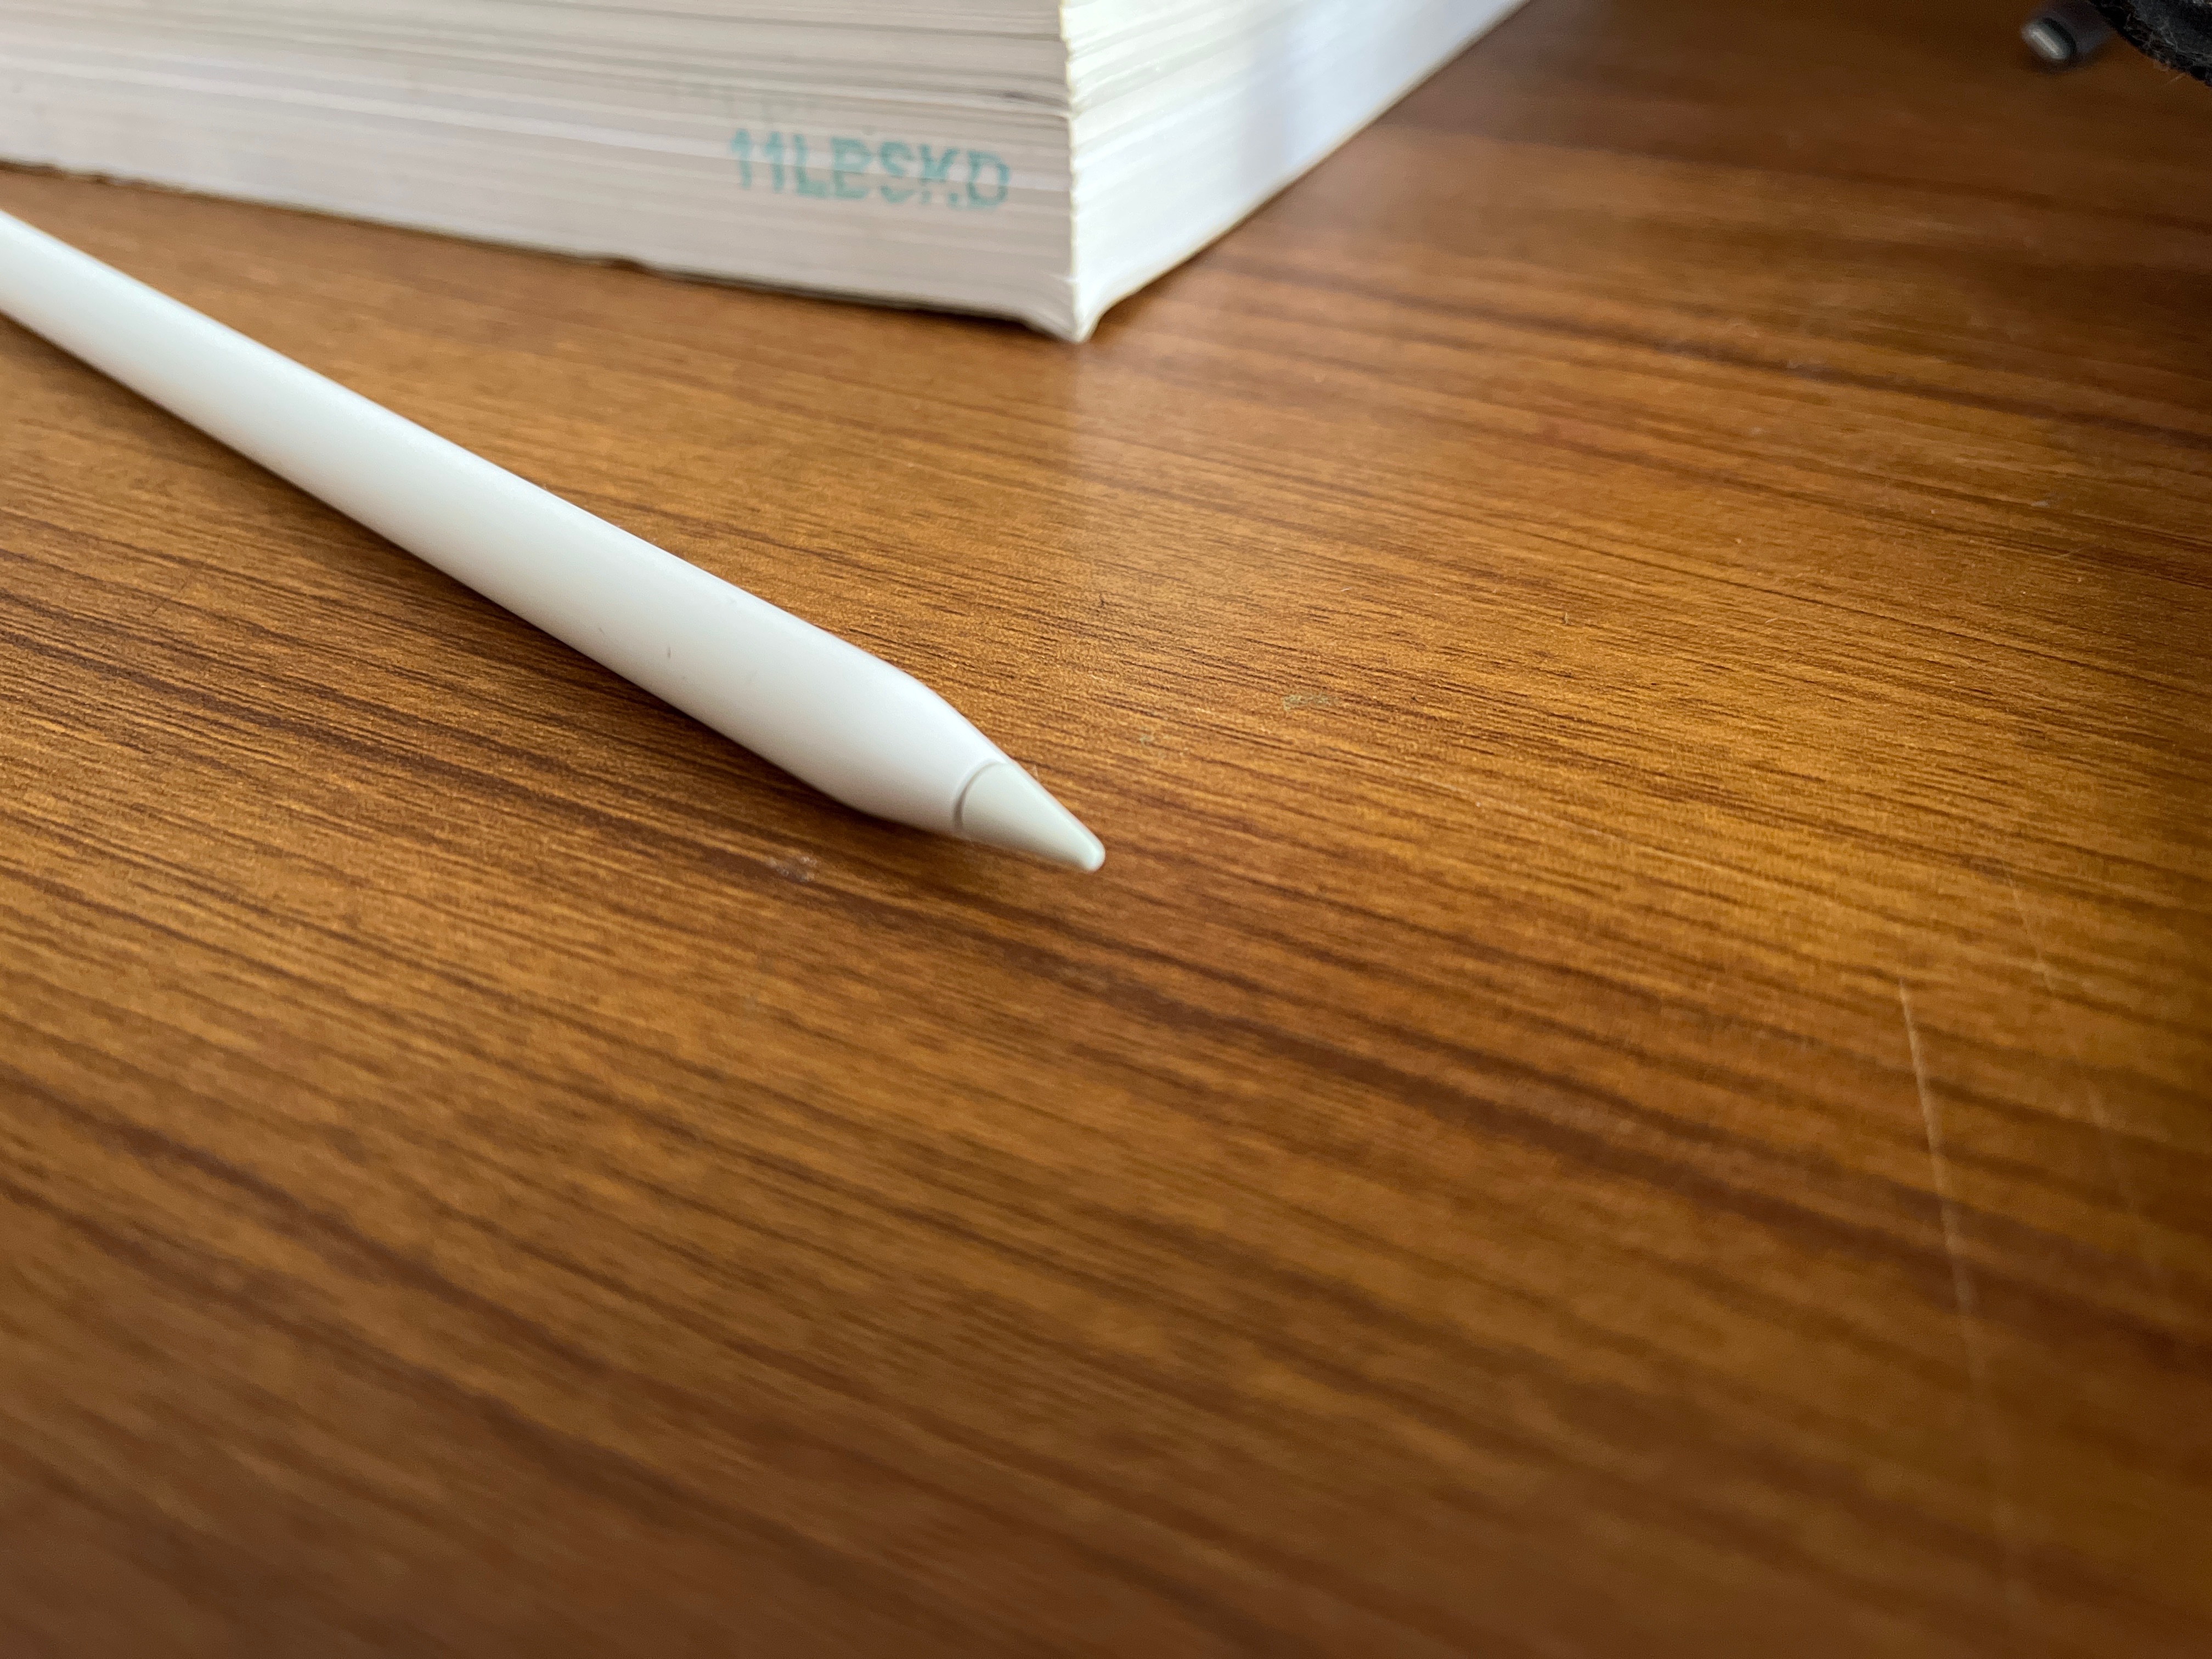 Apple Pencil 1st / 2nd generation wood cover